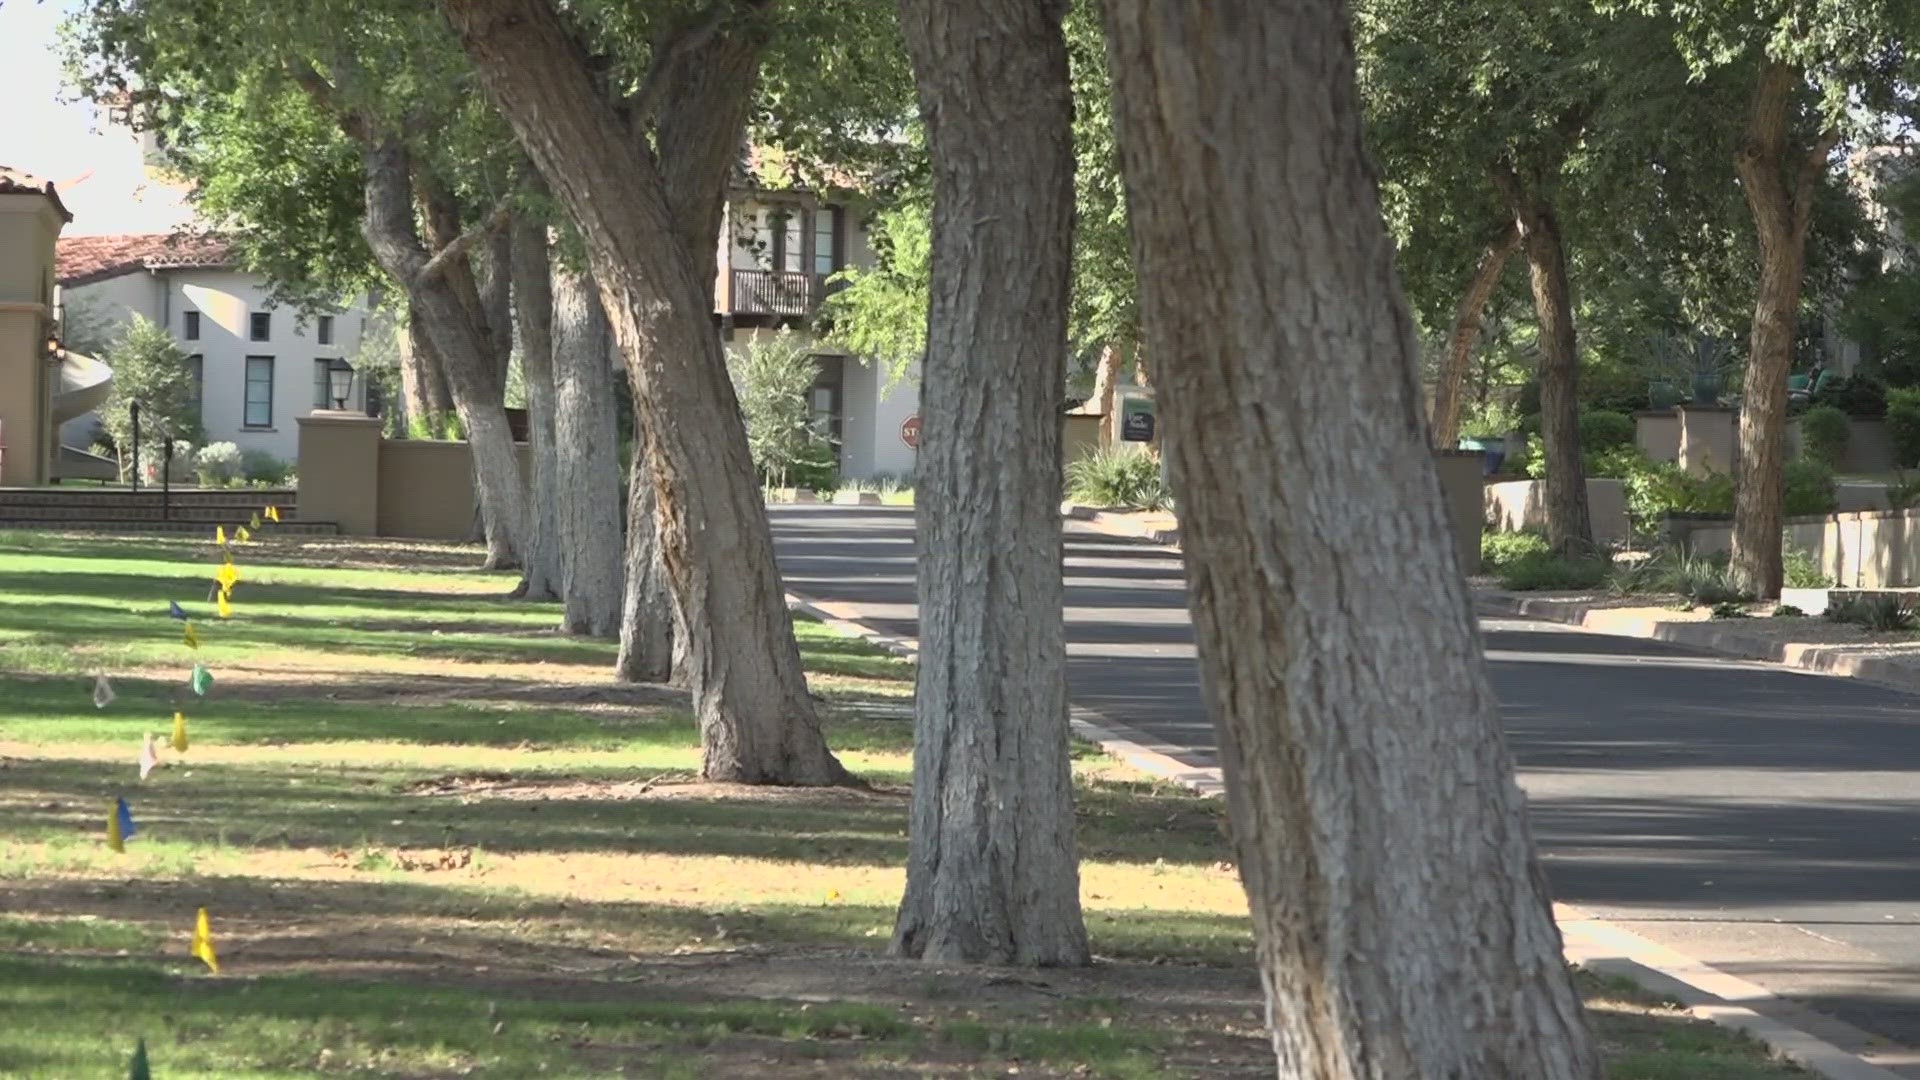 The Silverleaf Arcadia neighborhood is fighting it's HOA over trees they don't want to cut down.